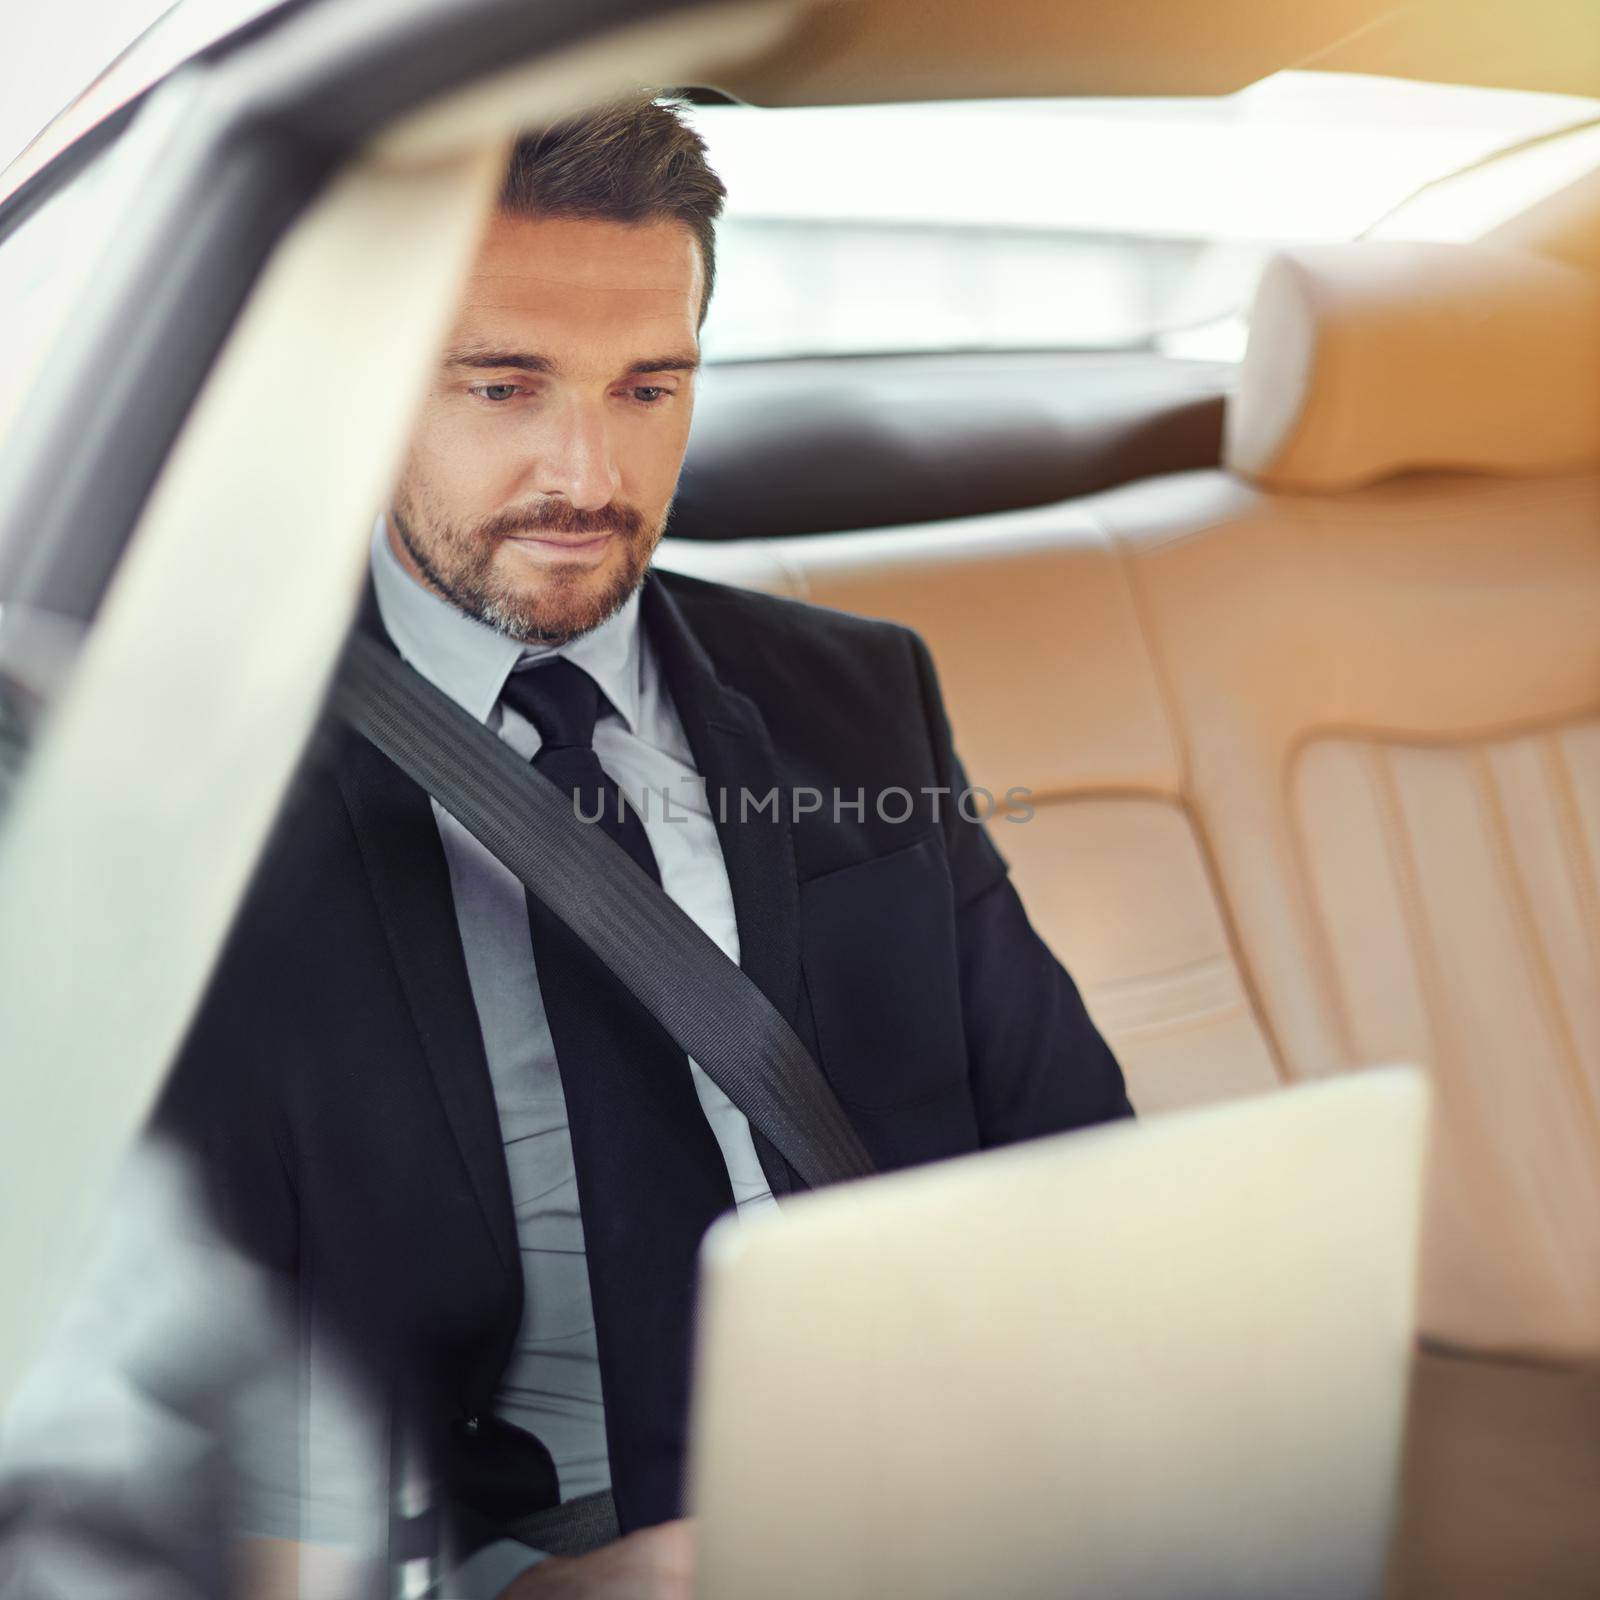 Cropped shot of a businessman in the backseat of a car.